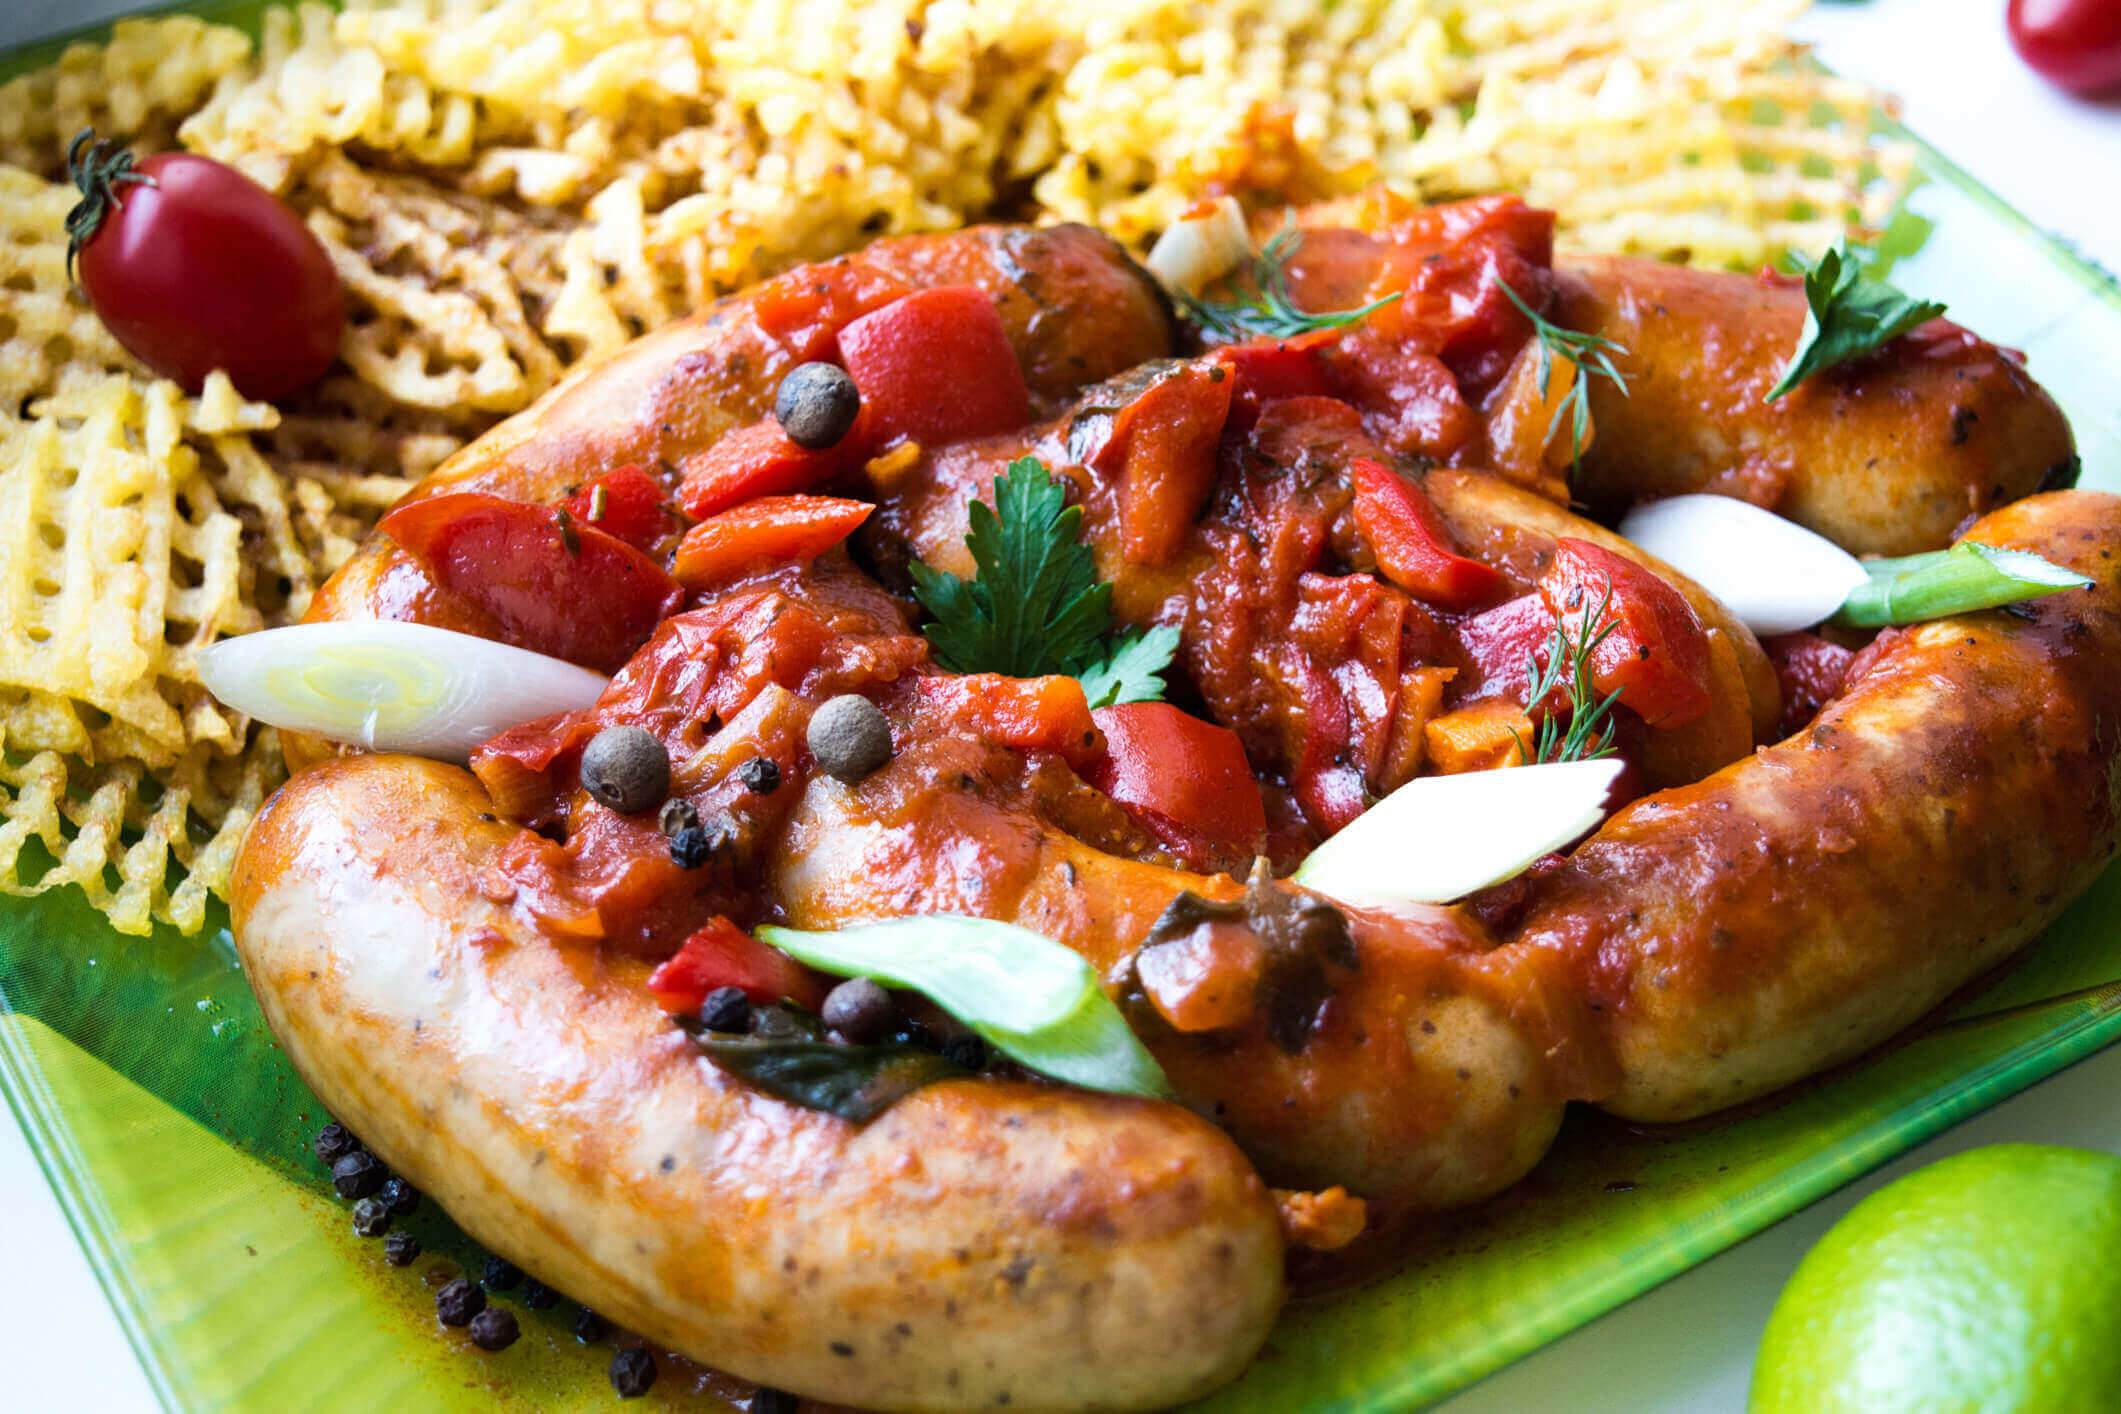 Pork sausages in a spicy tomato sauce